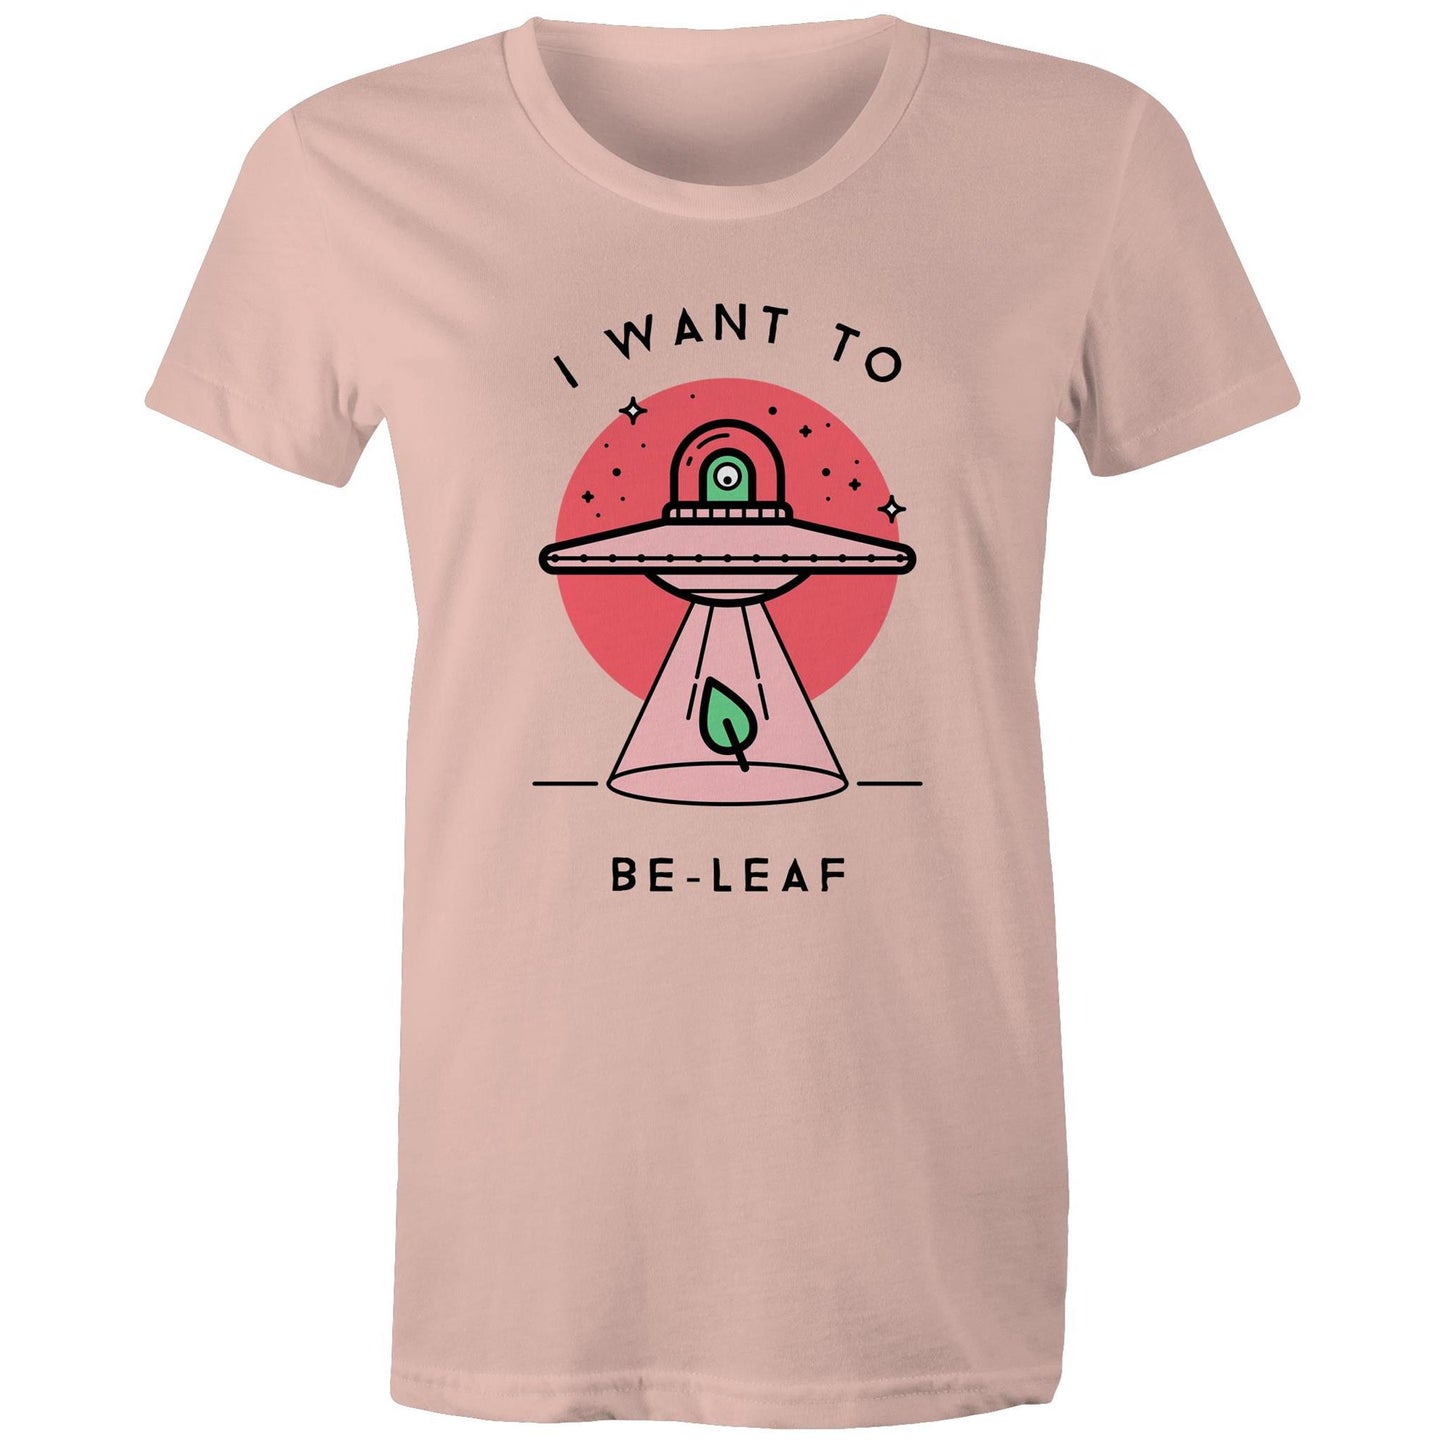 I Want To Be-Leaf, UFO - Womens T-shirt Pale Pink Womens T-shirt Sci Fi